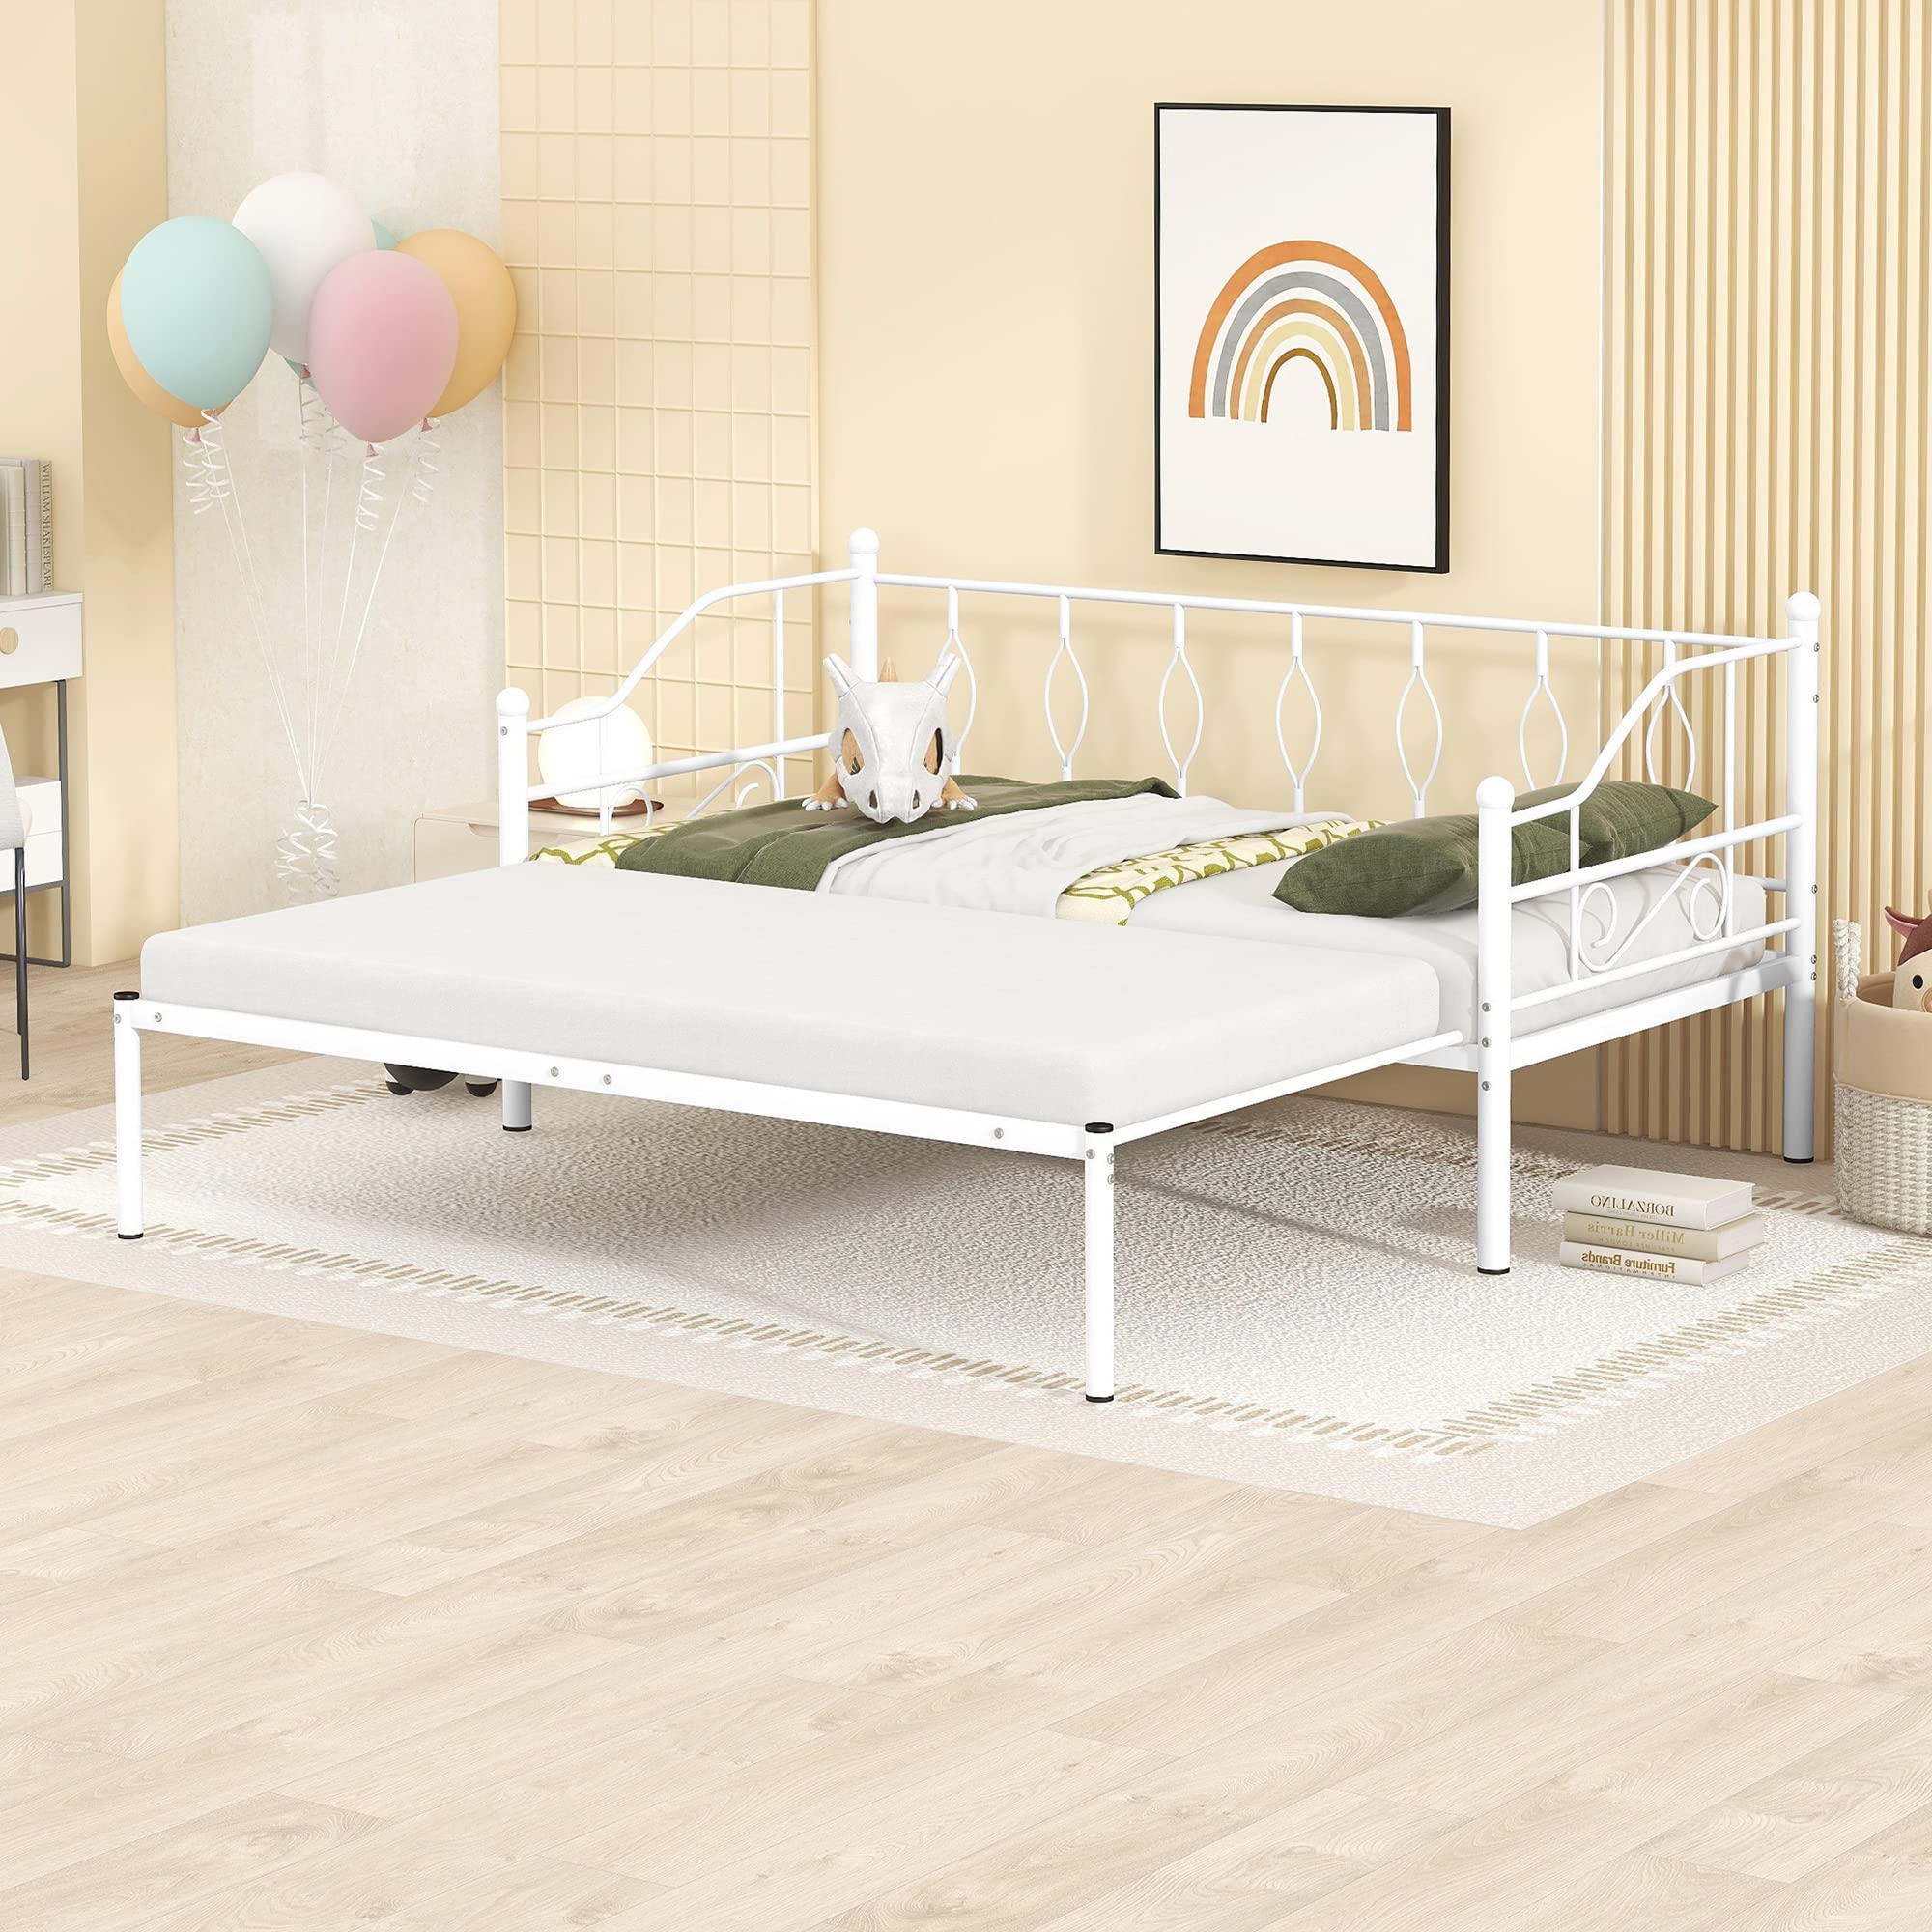 Lostcat Twin Size Daybed Bed with Trundle, Metal Bedframe with Safety Guardrails & Heavy Duty Steel Slat Support for Kids Teens Adults, Space Saving, No Box Spring Needed, White - Lostcat